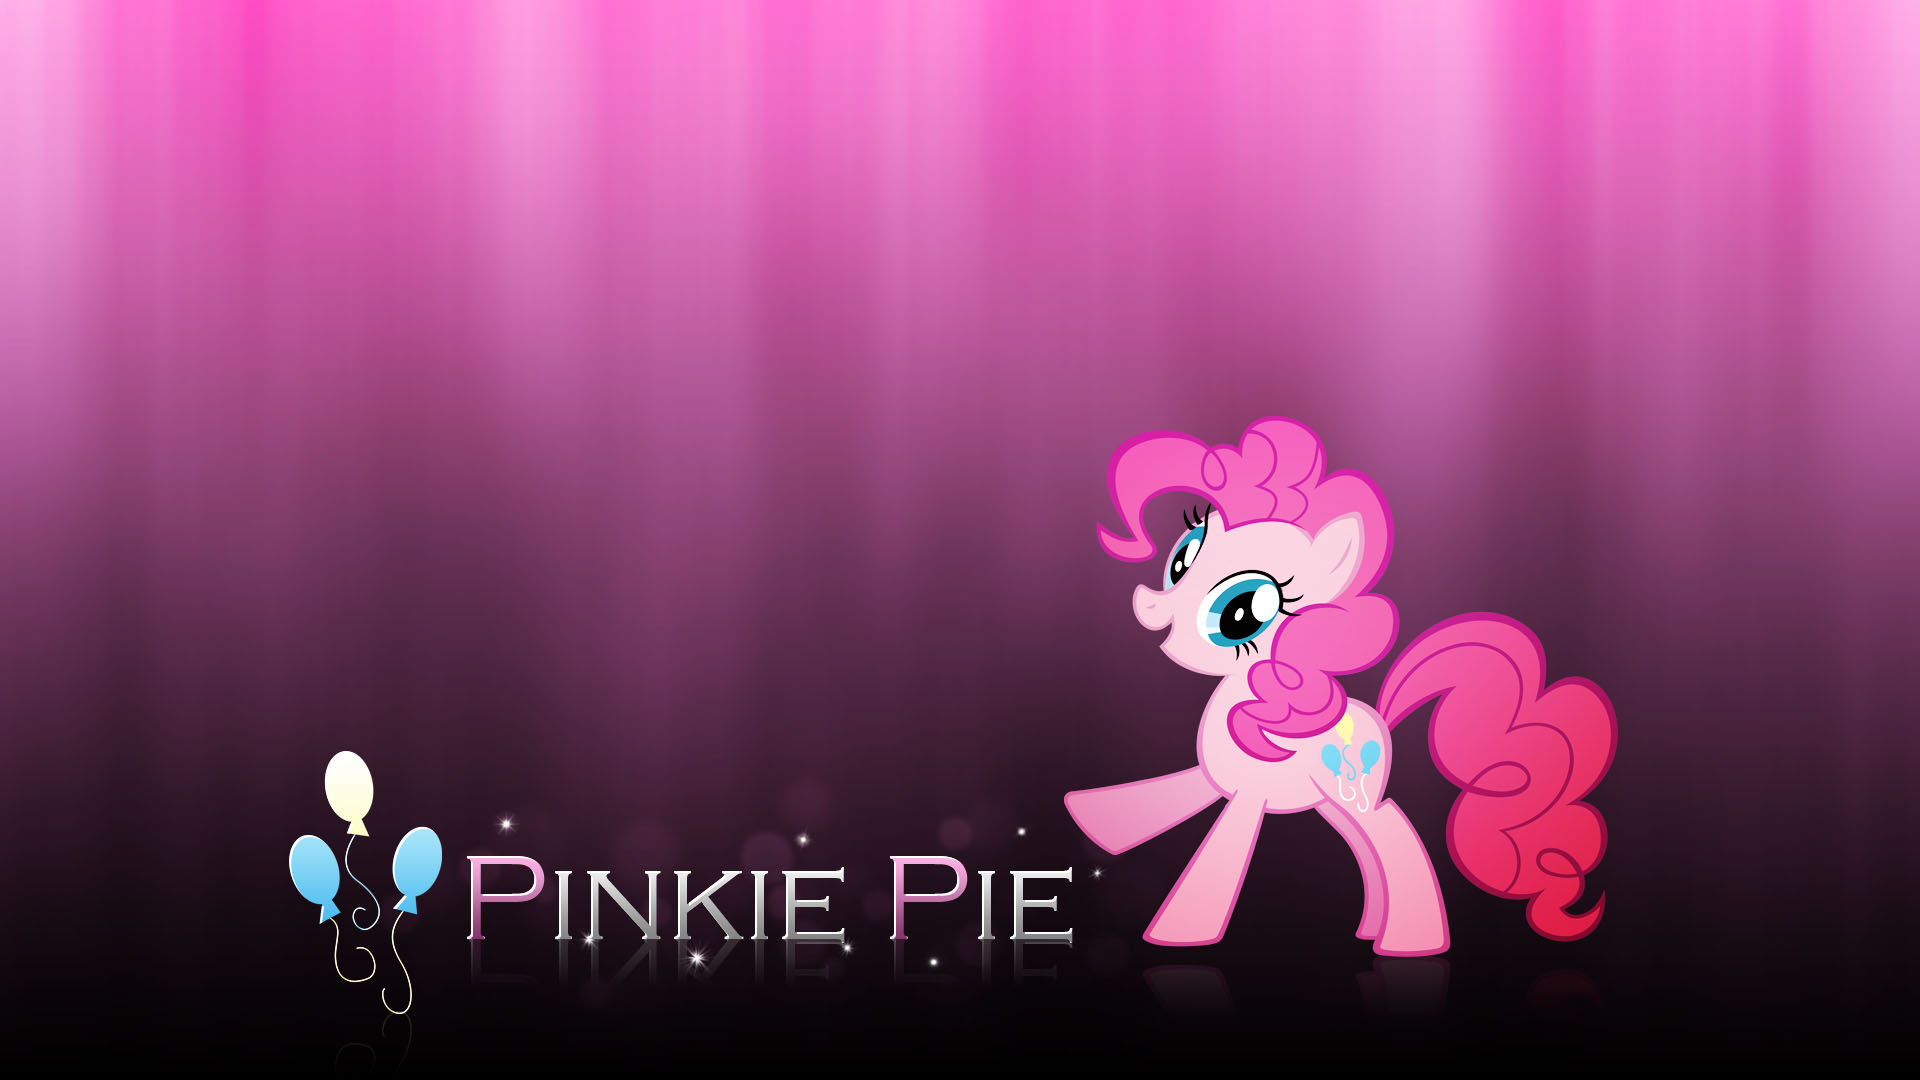 Generic Pinkie Pie Wallpaper by Esipode